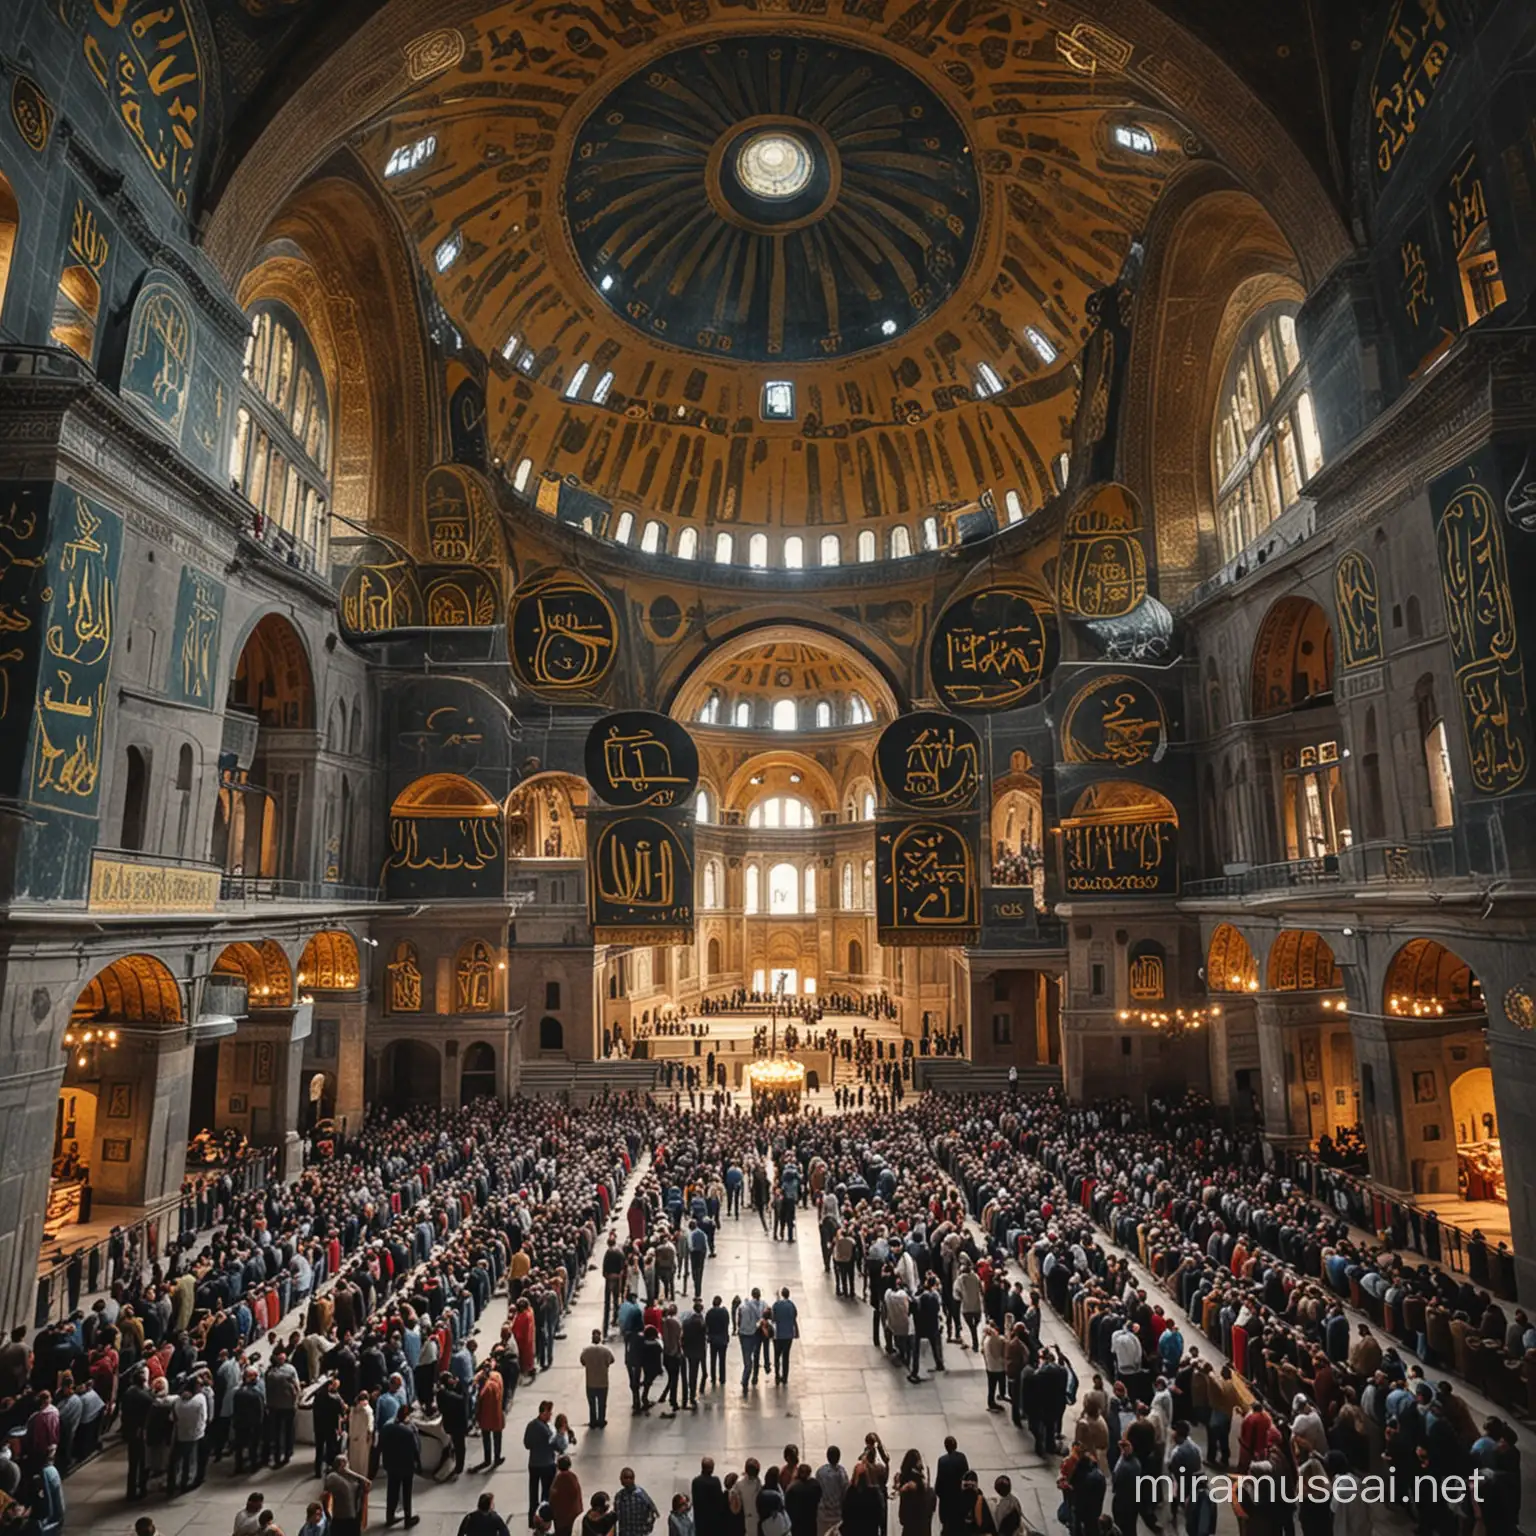 Interior View of Hagia Sophia with Crowded Congregation and Brightness